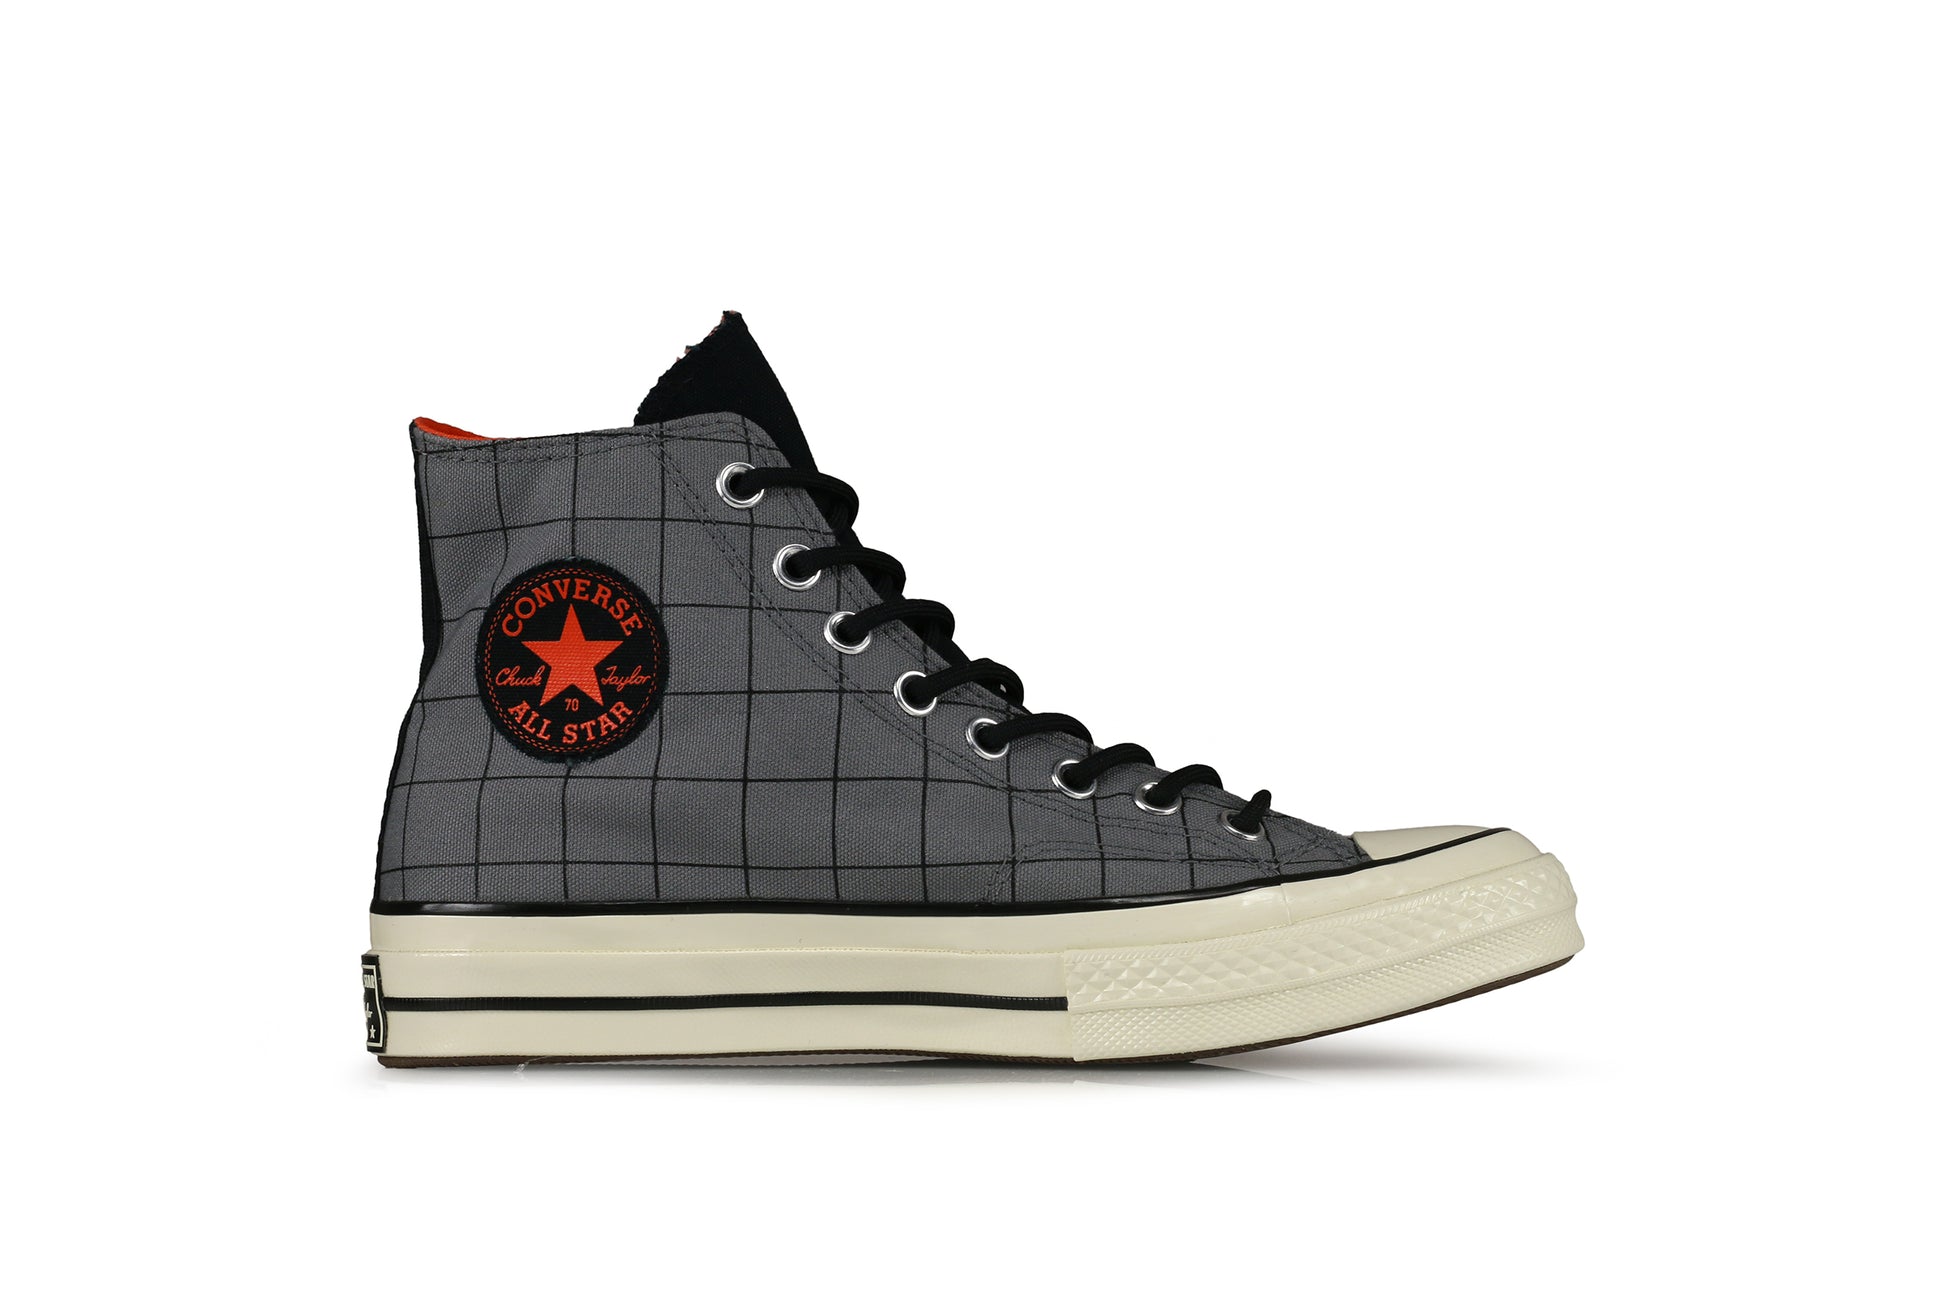 Converse 70 Gore - Tex "Grid – IetpShops - Customized "Suicide Squad" Converse sneakers featuring the Enchantress character